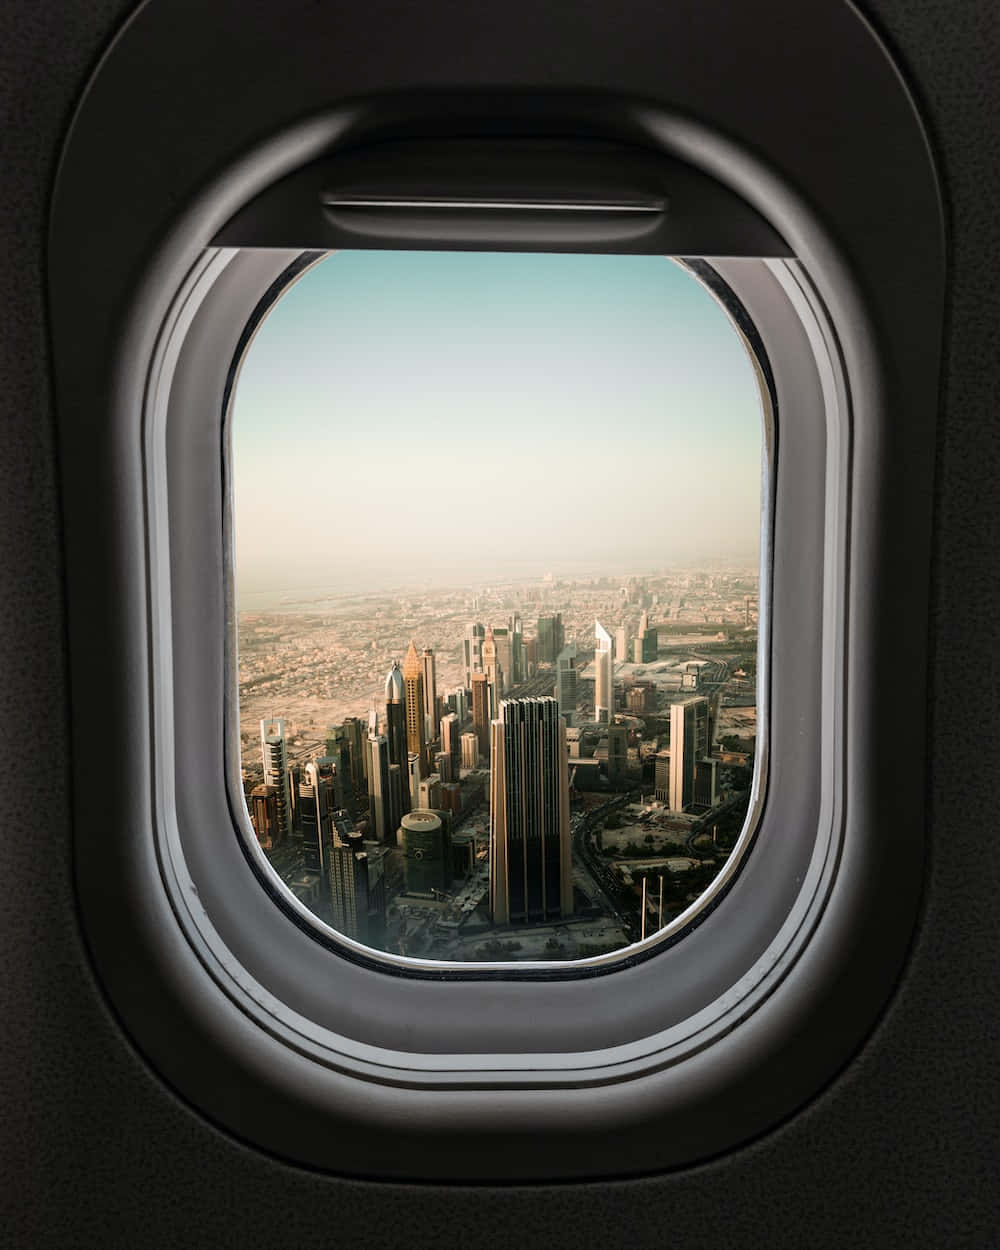 Take in Breathtaking Views from an Airplane Window